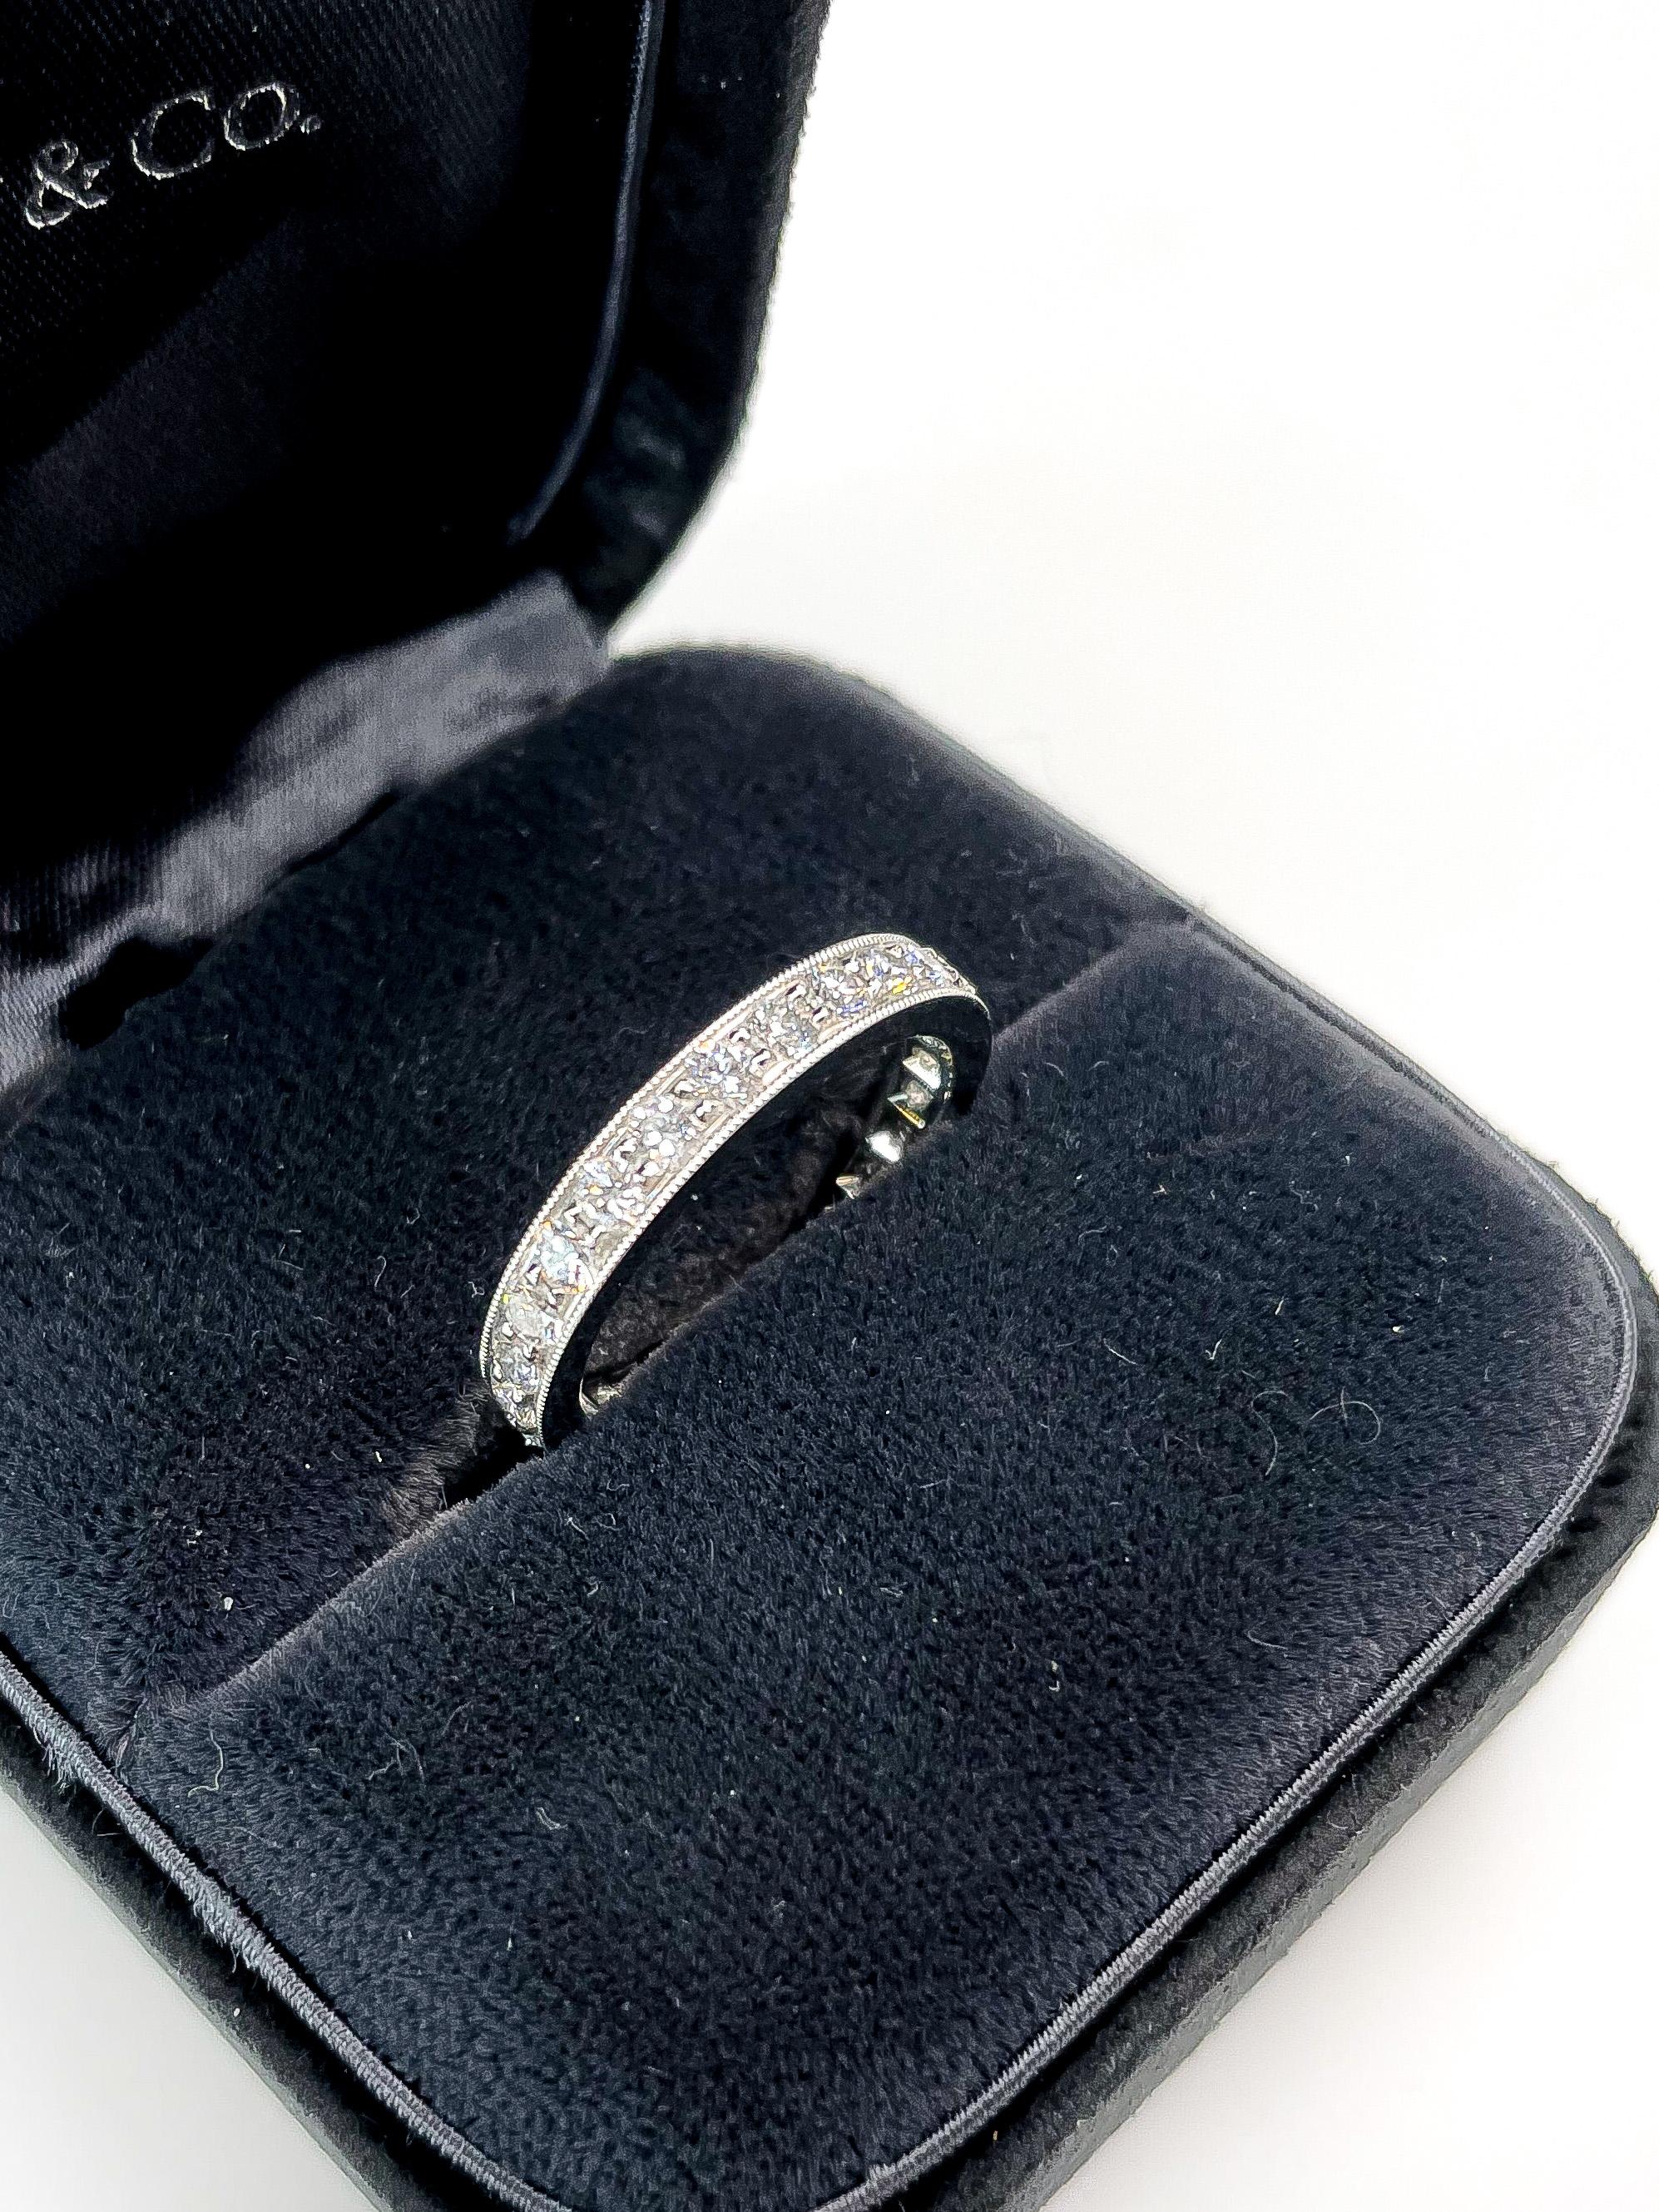 Tiffany & Co. Legacy Platinum 1.50cttw Round Diamond Ring For Sale 1